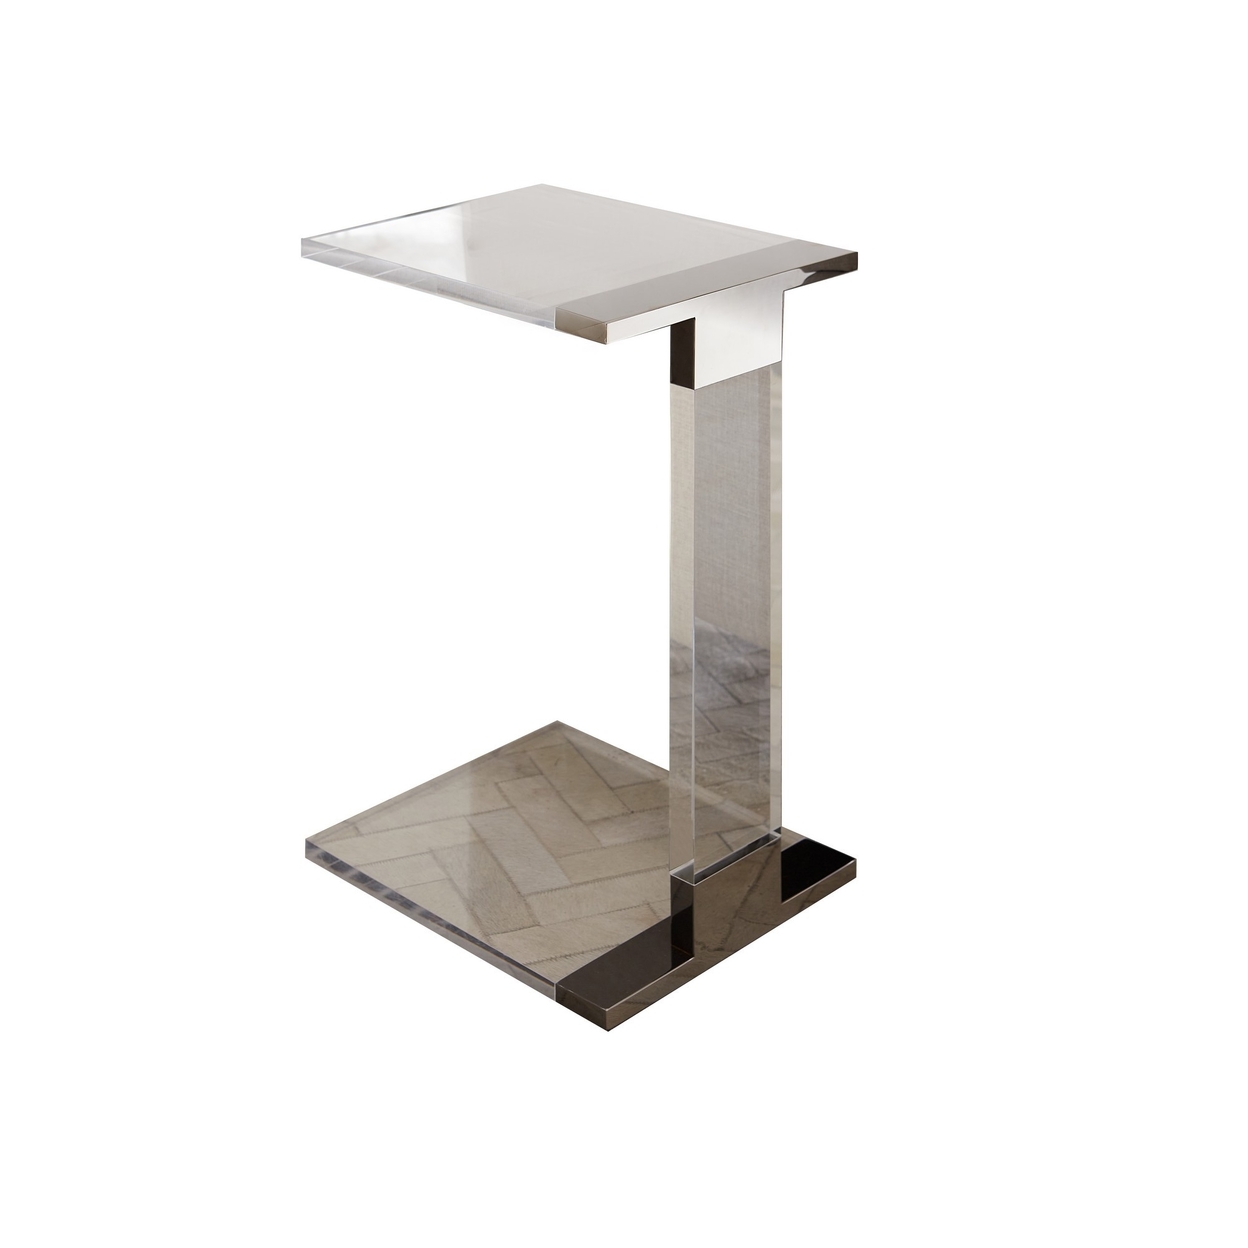 Greig 24 Inch C Shape End Table, Clear Acrylic, Deep Gray Stainless Steel- Saltoro Sherpi